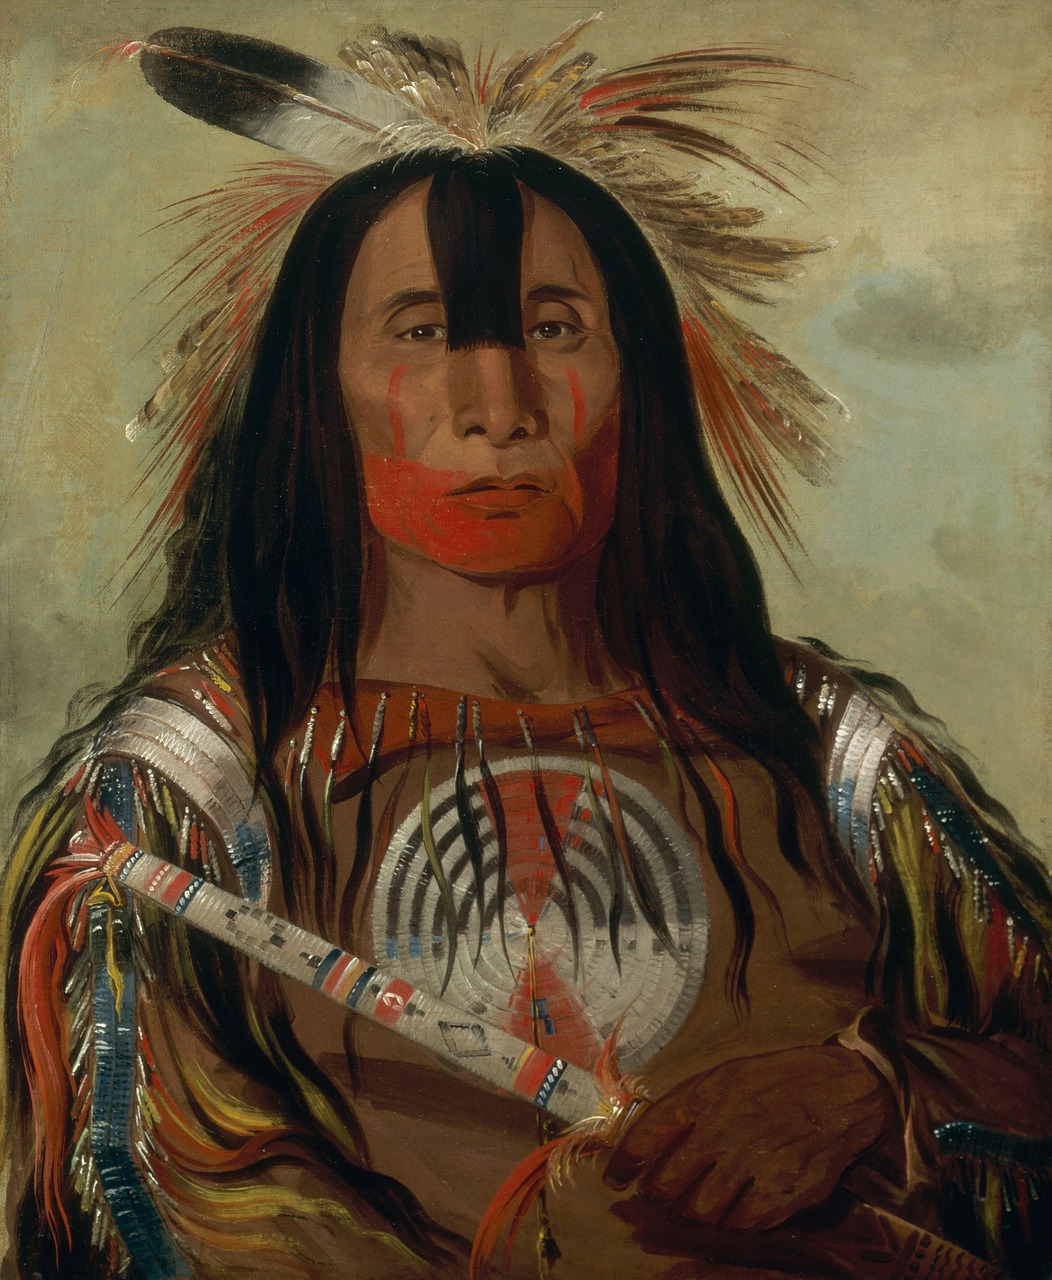 Painting of Indigenous man.